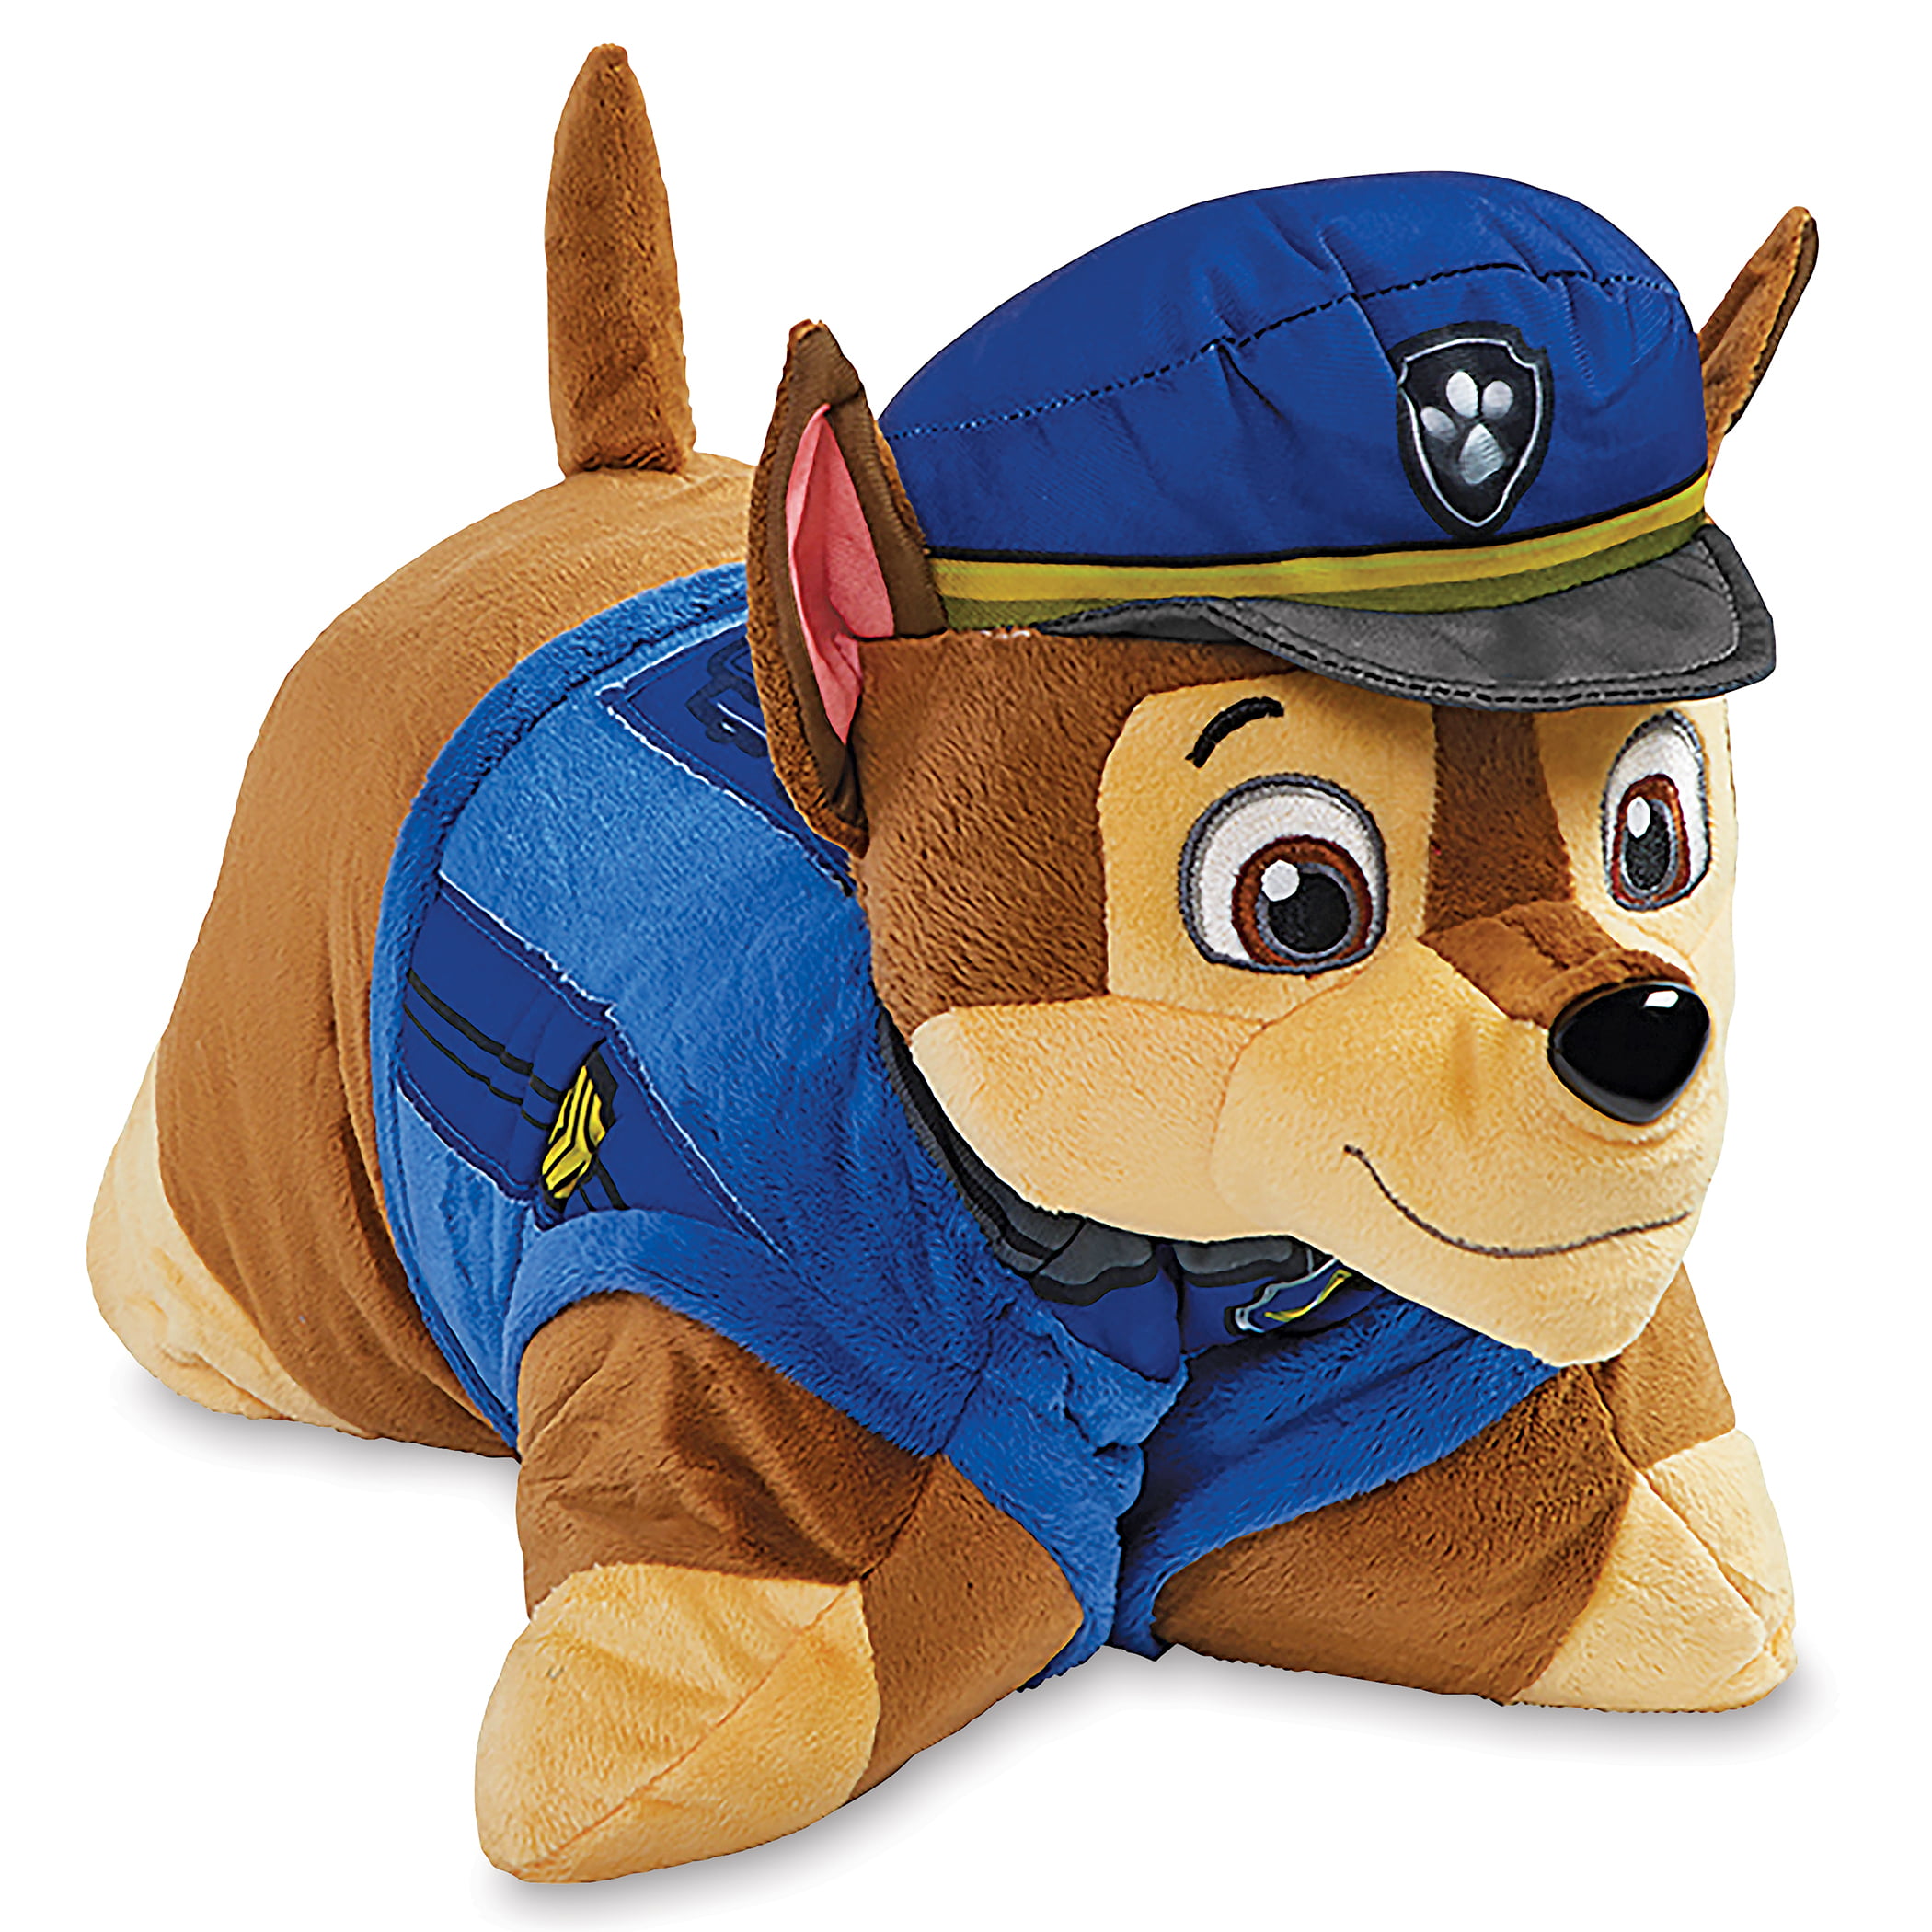 NEW Paw Patrol Chase and Marshall Travel Snuggly Neck Pillow 